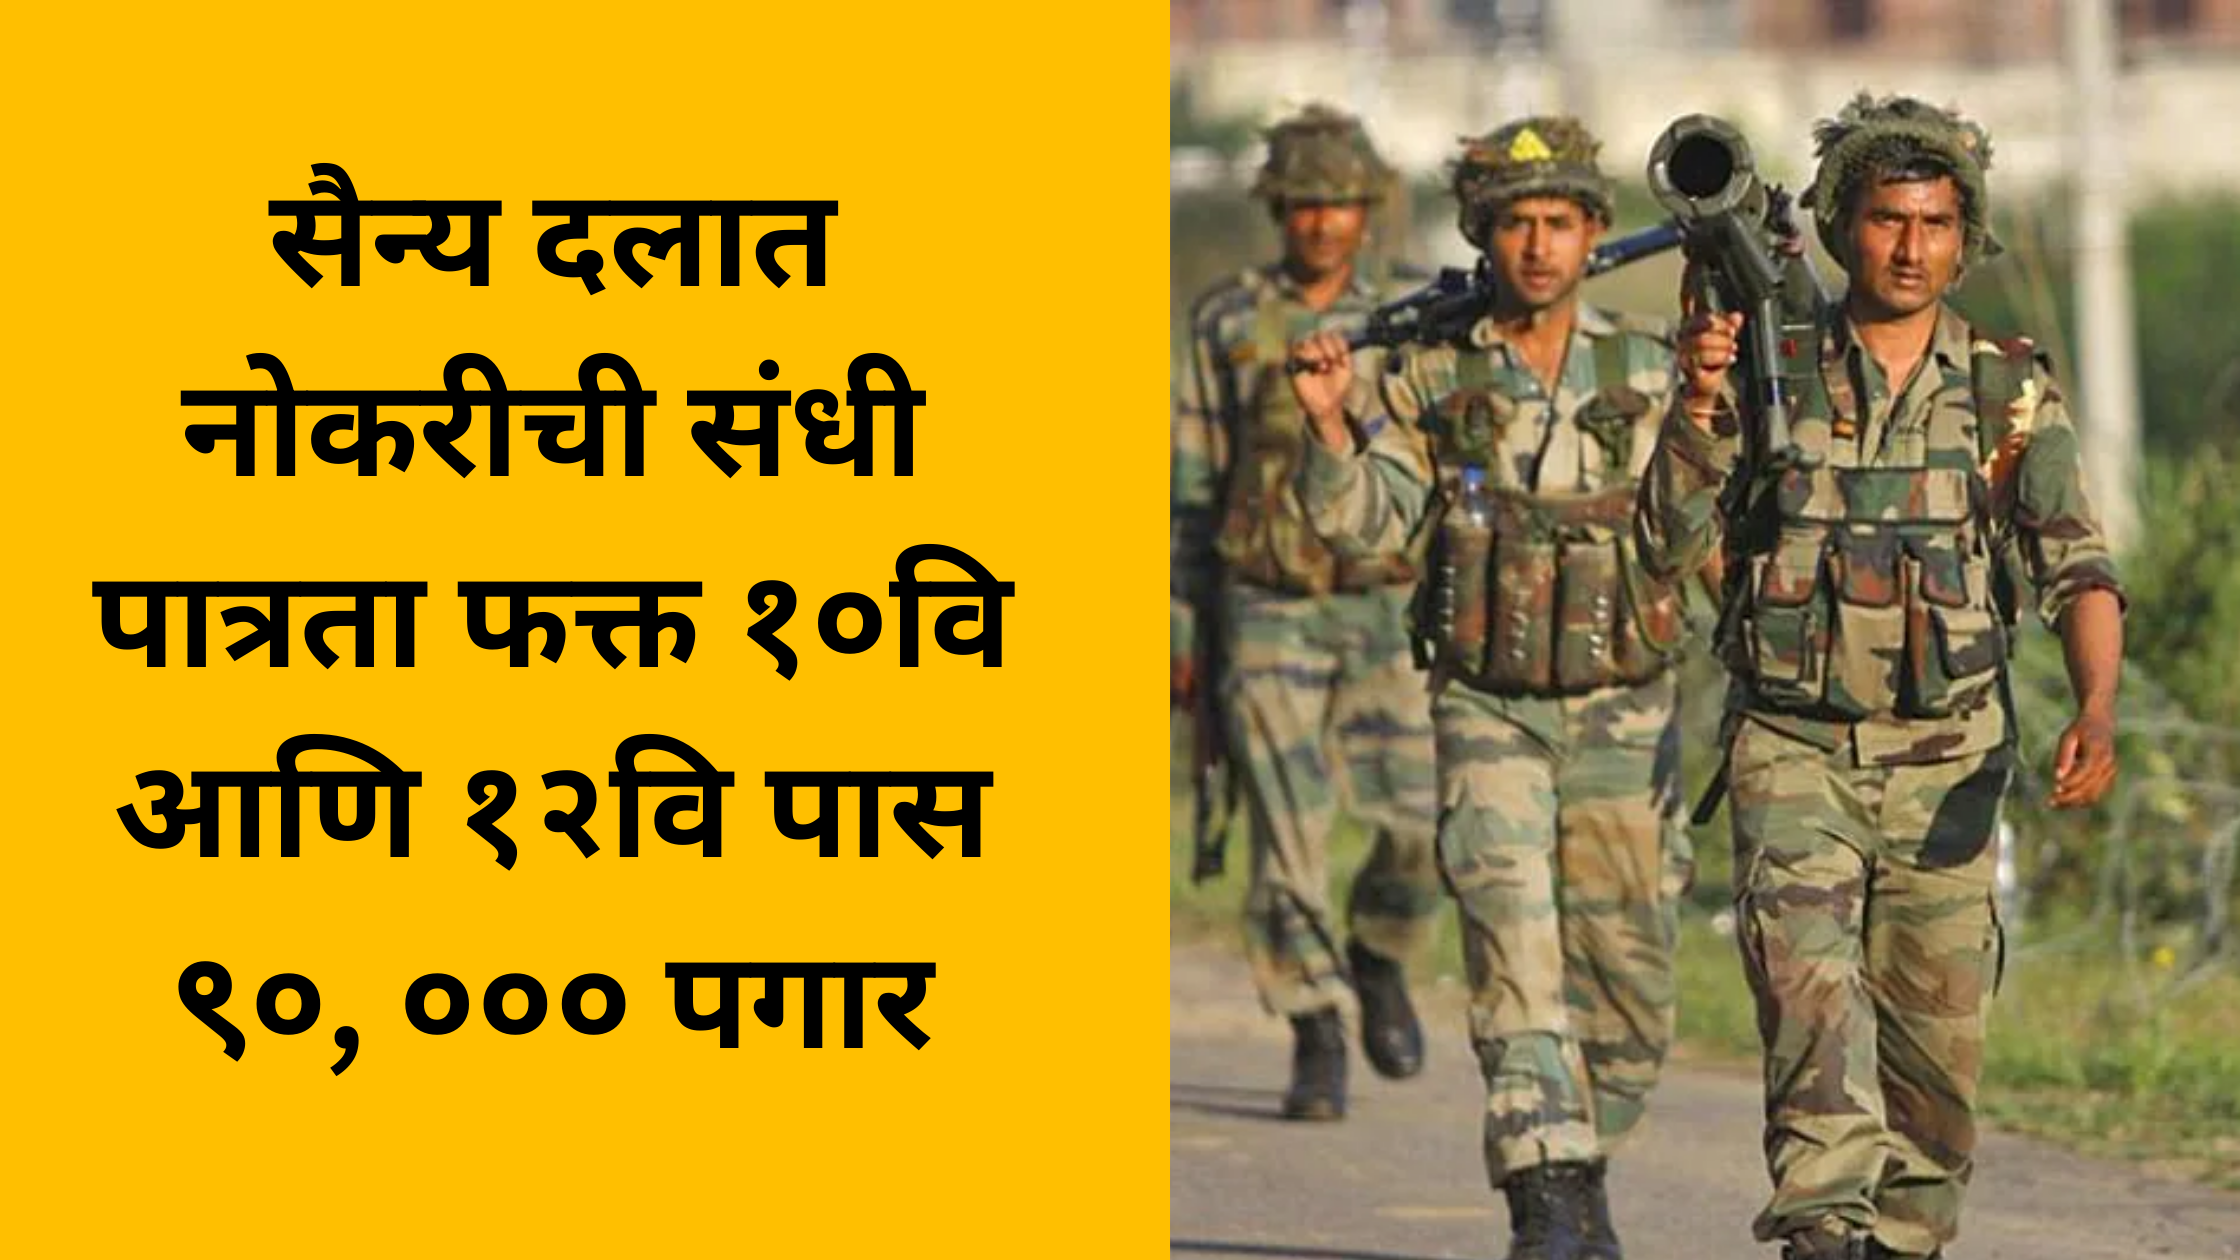 Army job opportunity. Eligibility 10th and 12th pass only, 90,000 salary